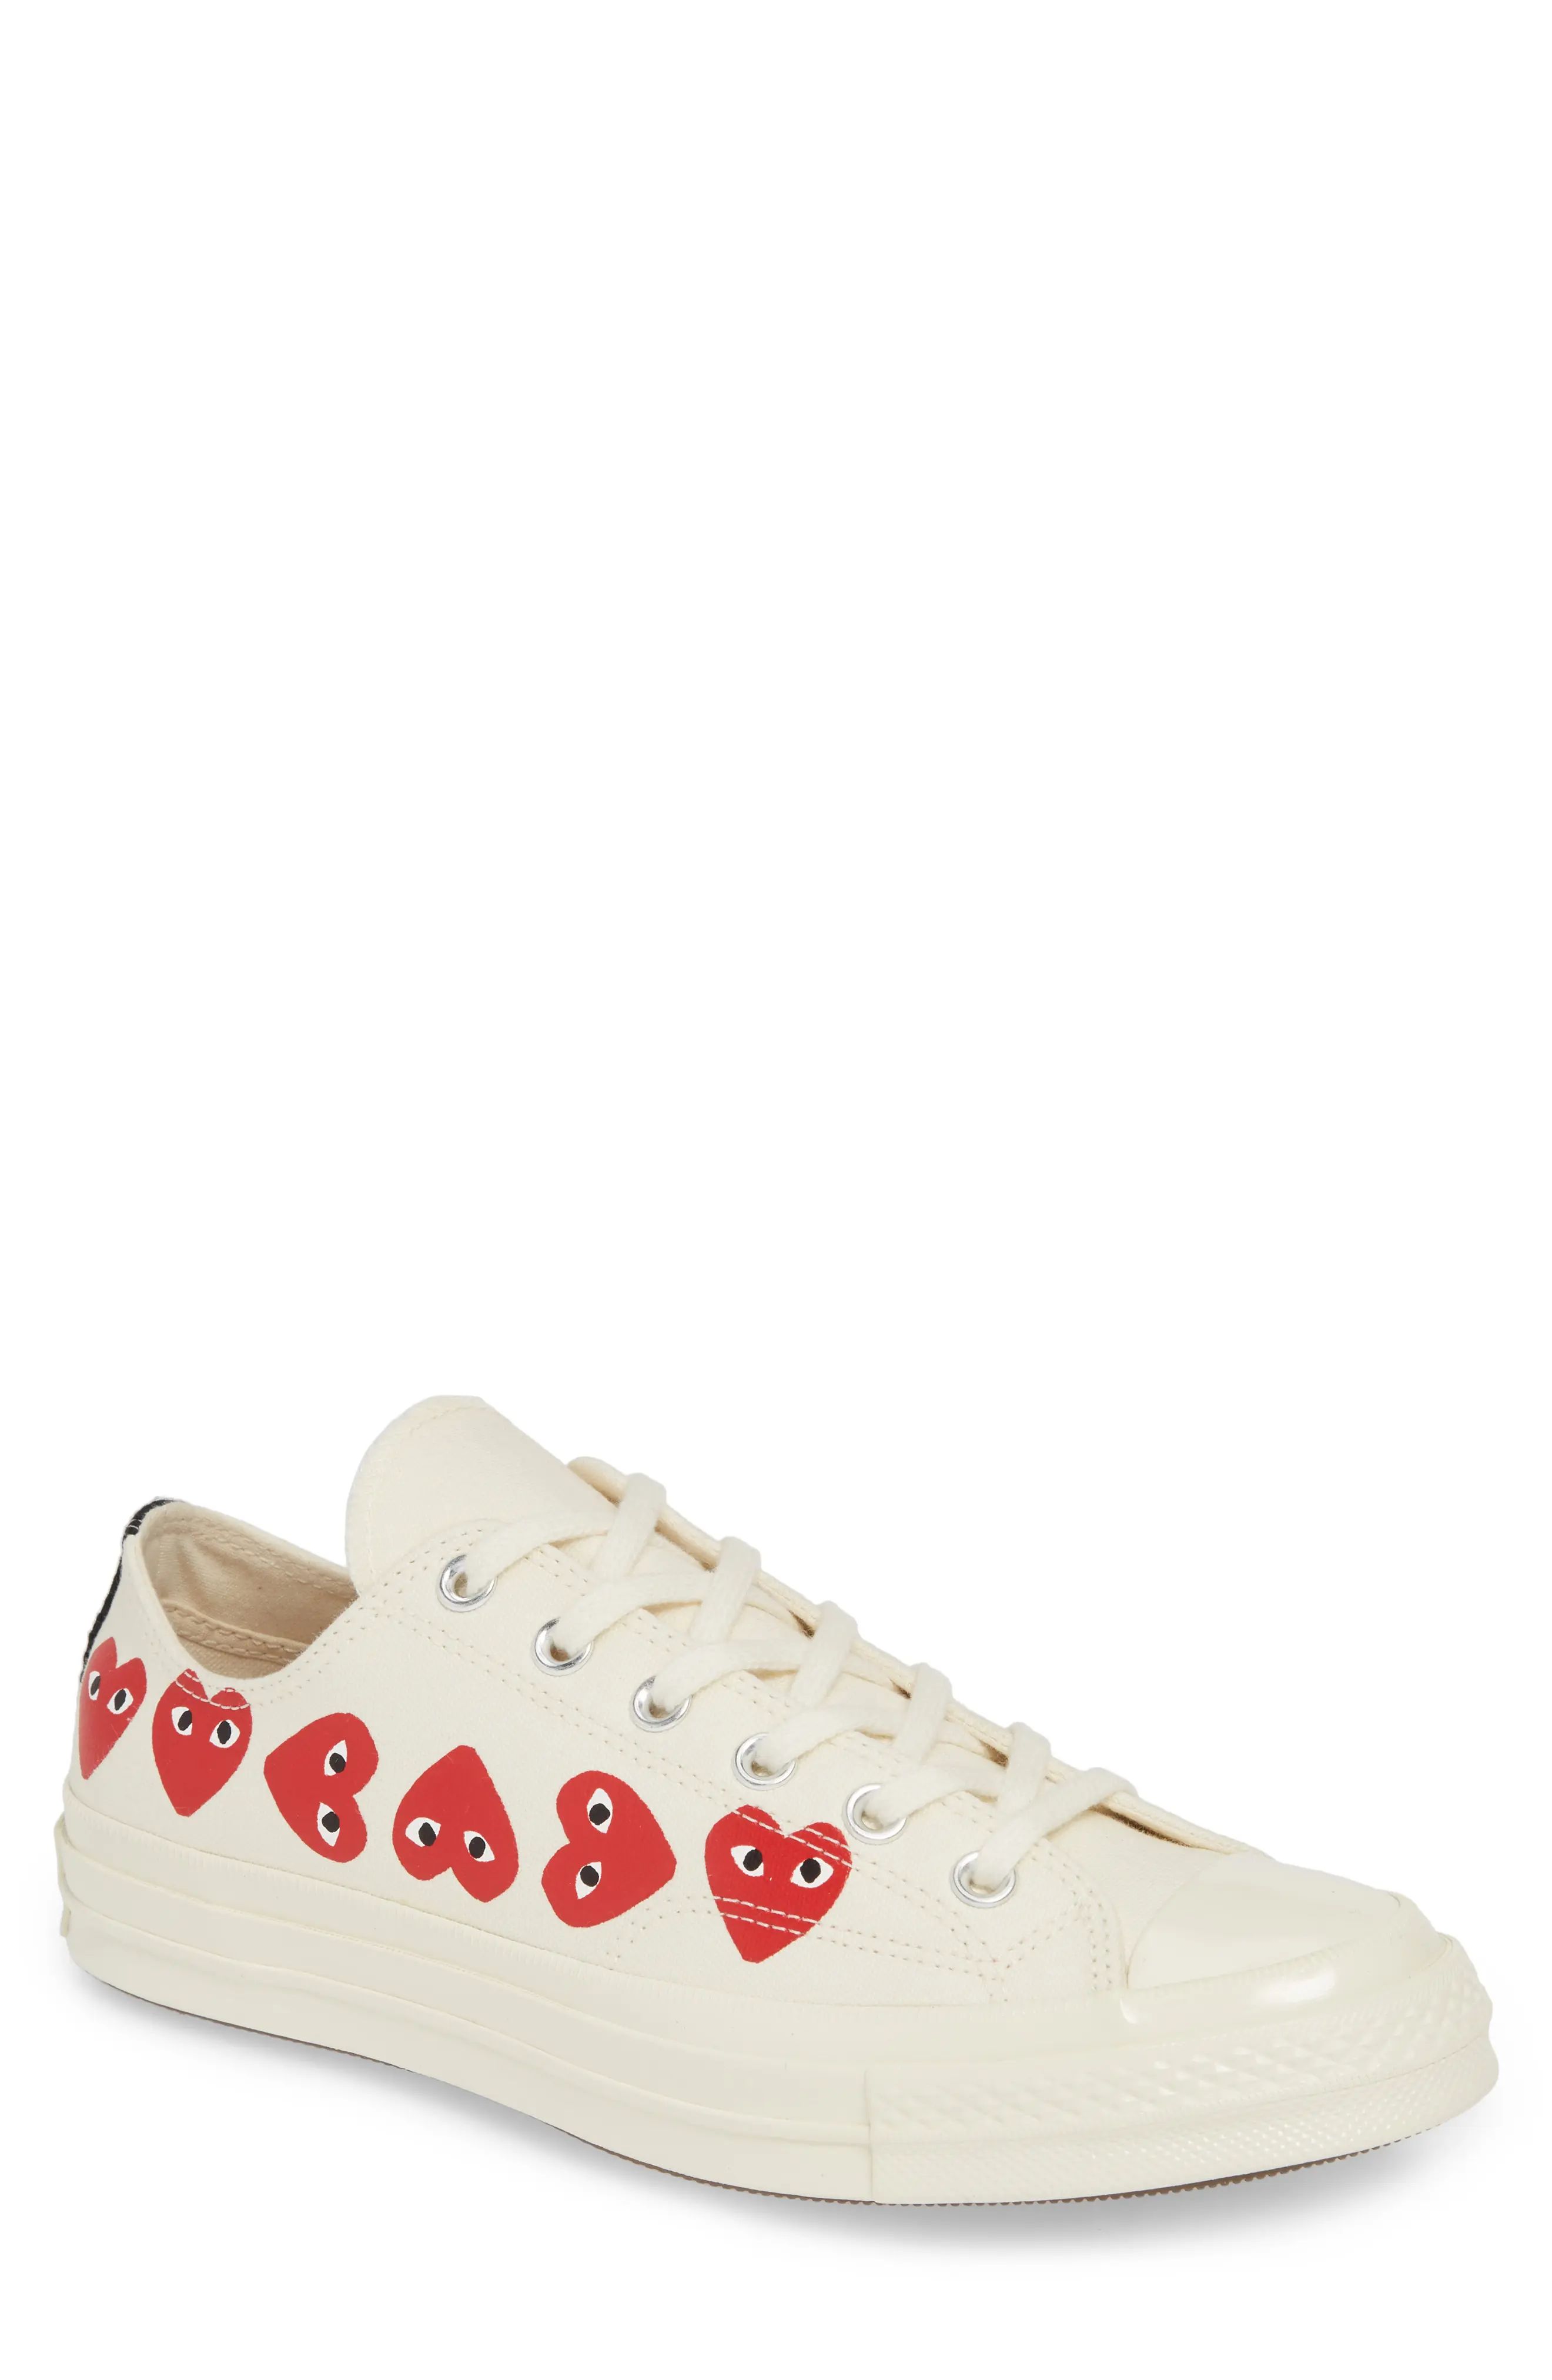 Comme des Garcons PLAY x Converse Chuck Taylor(R) Low Top Sneaker in Off White at Nordstrom, Size 11 | Nordstrom